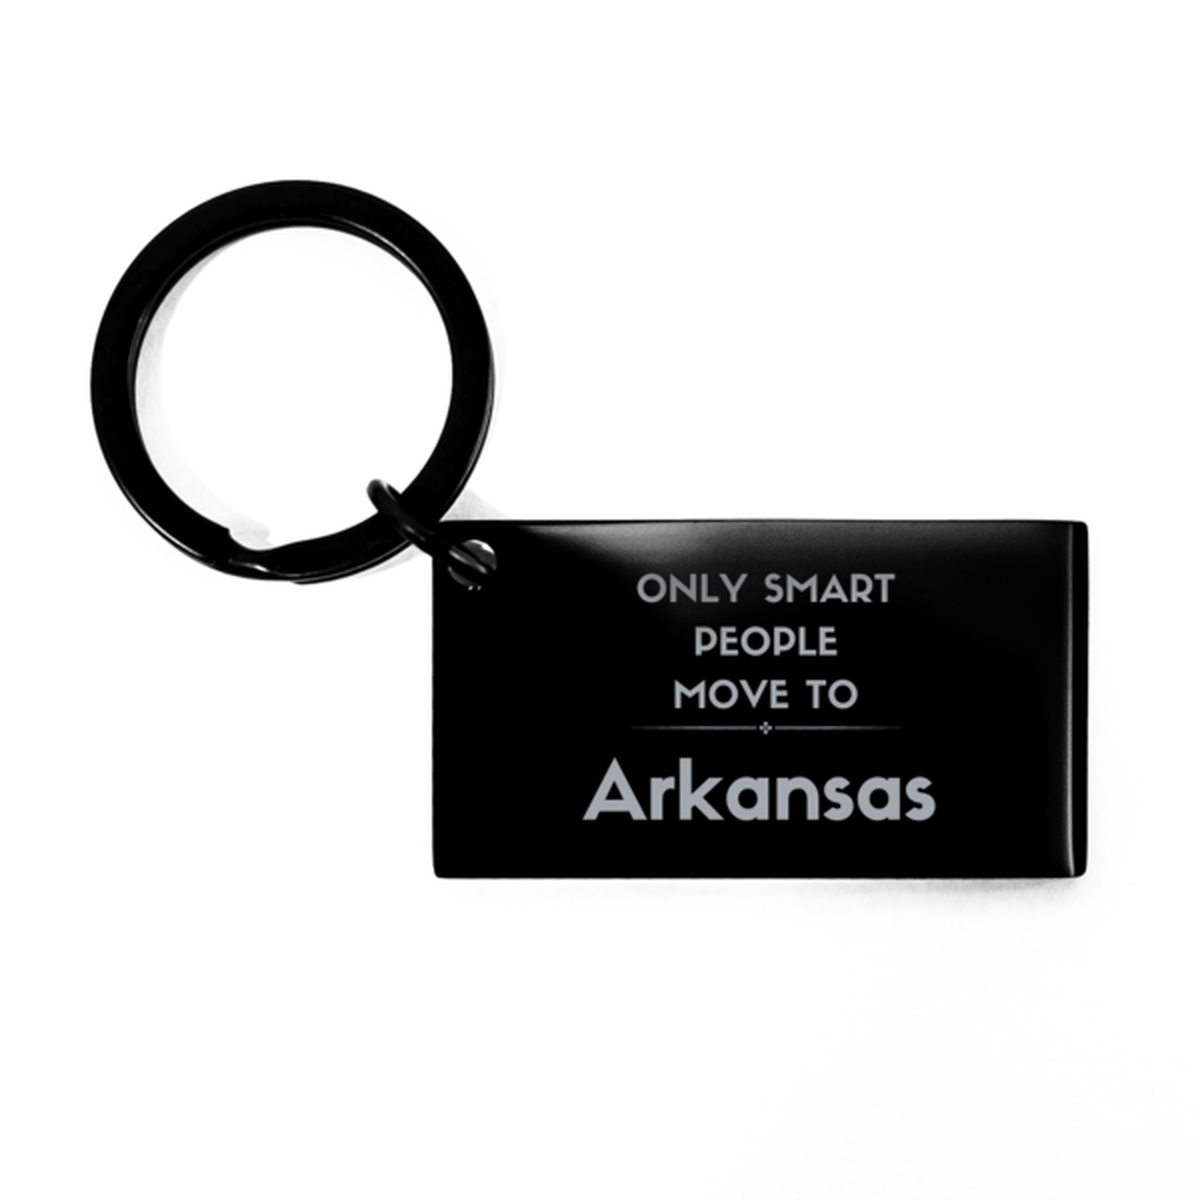 Only smart people move to Arkansas Keychain, Gag Gifts For Arkansas, Move to Arkansas Gifts for Friends Coworker Funny Saying Quote